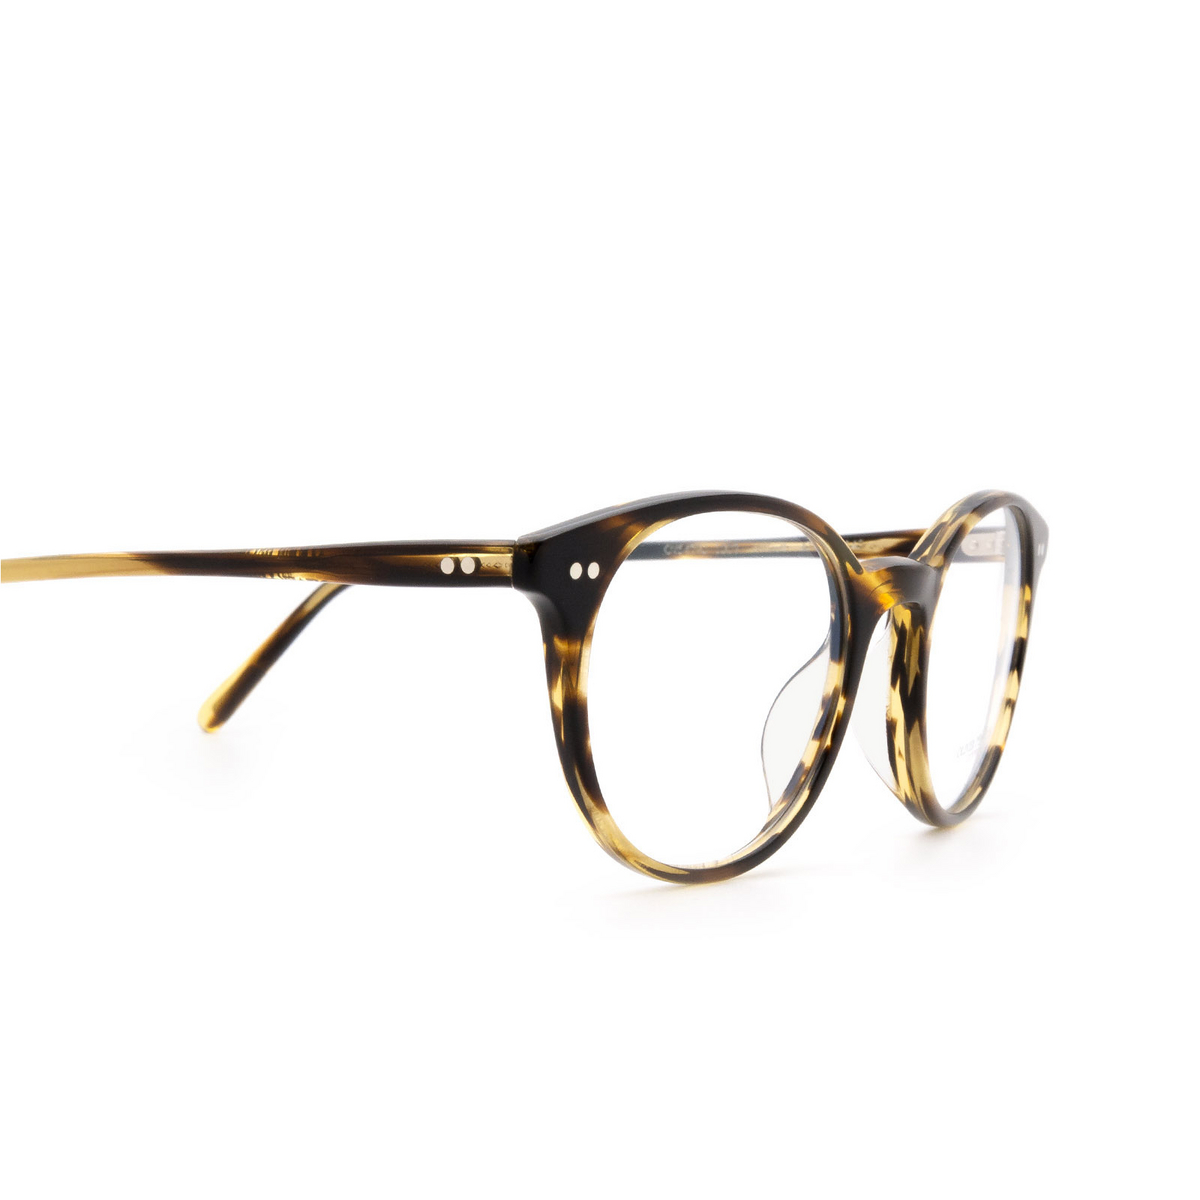 Oliver Peoples MIKETT Eyeglasses 1003 Cocobolo - 3/4